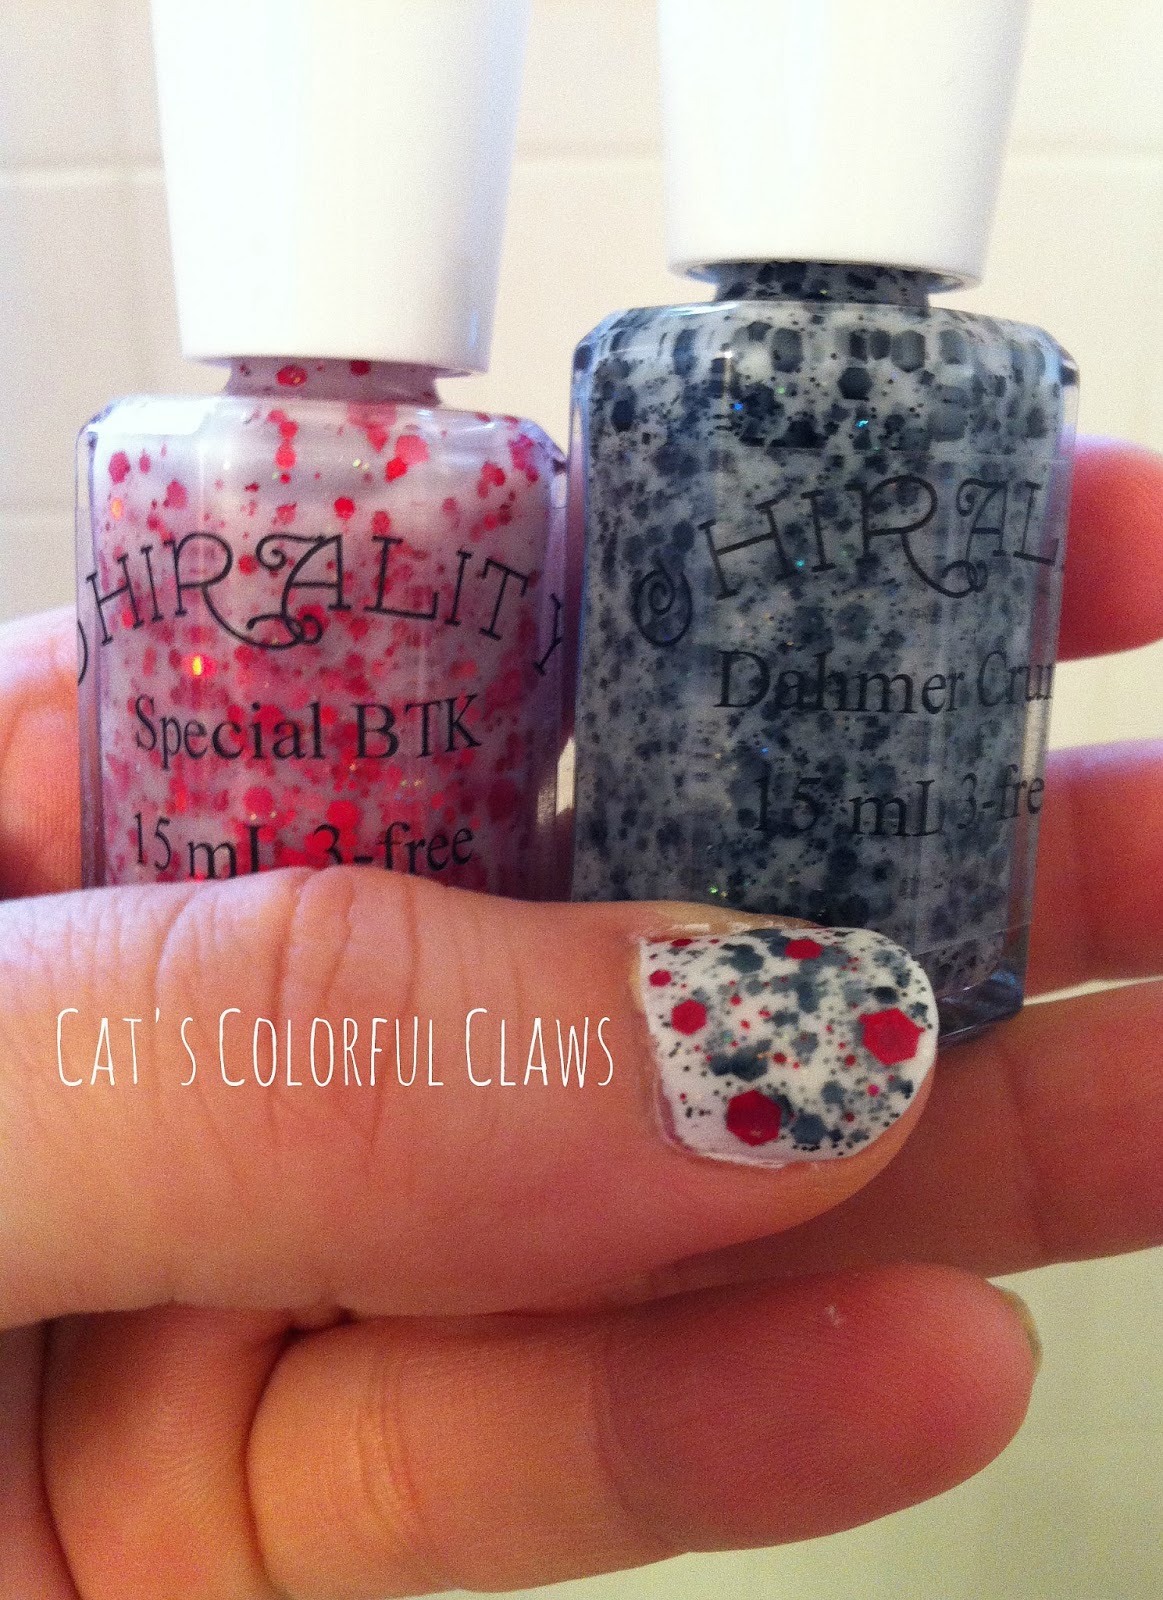 Cat's Colorful Claws: Chirality - Dahmer Crunch and Special BTK Swatches